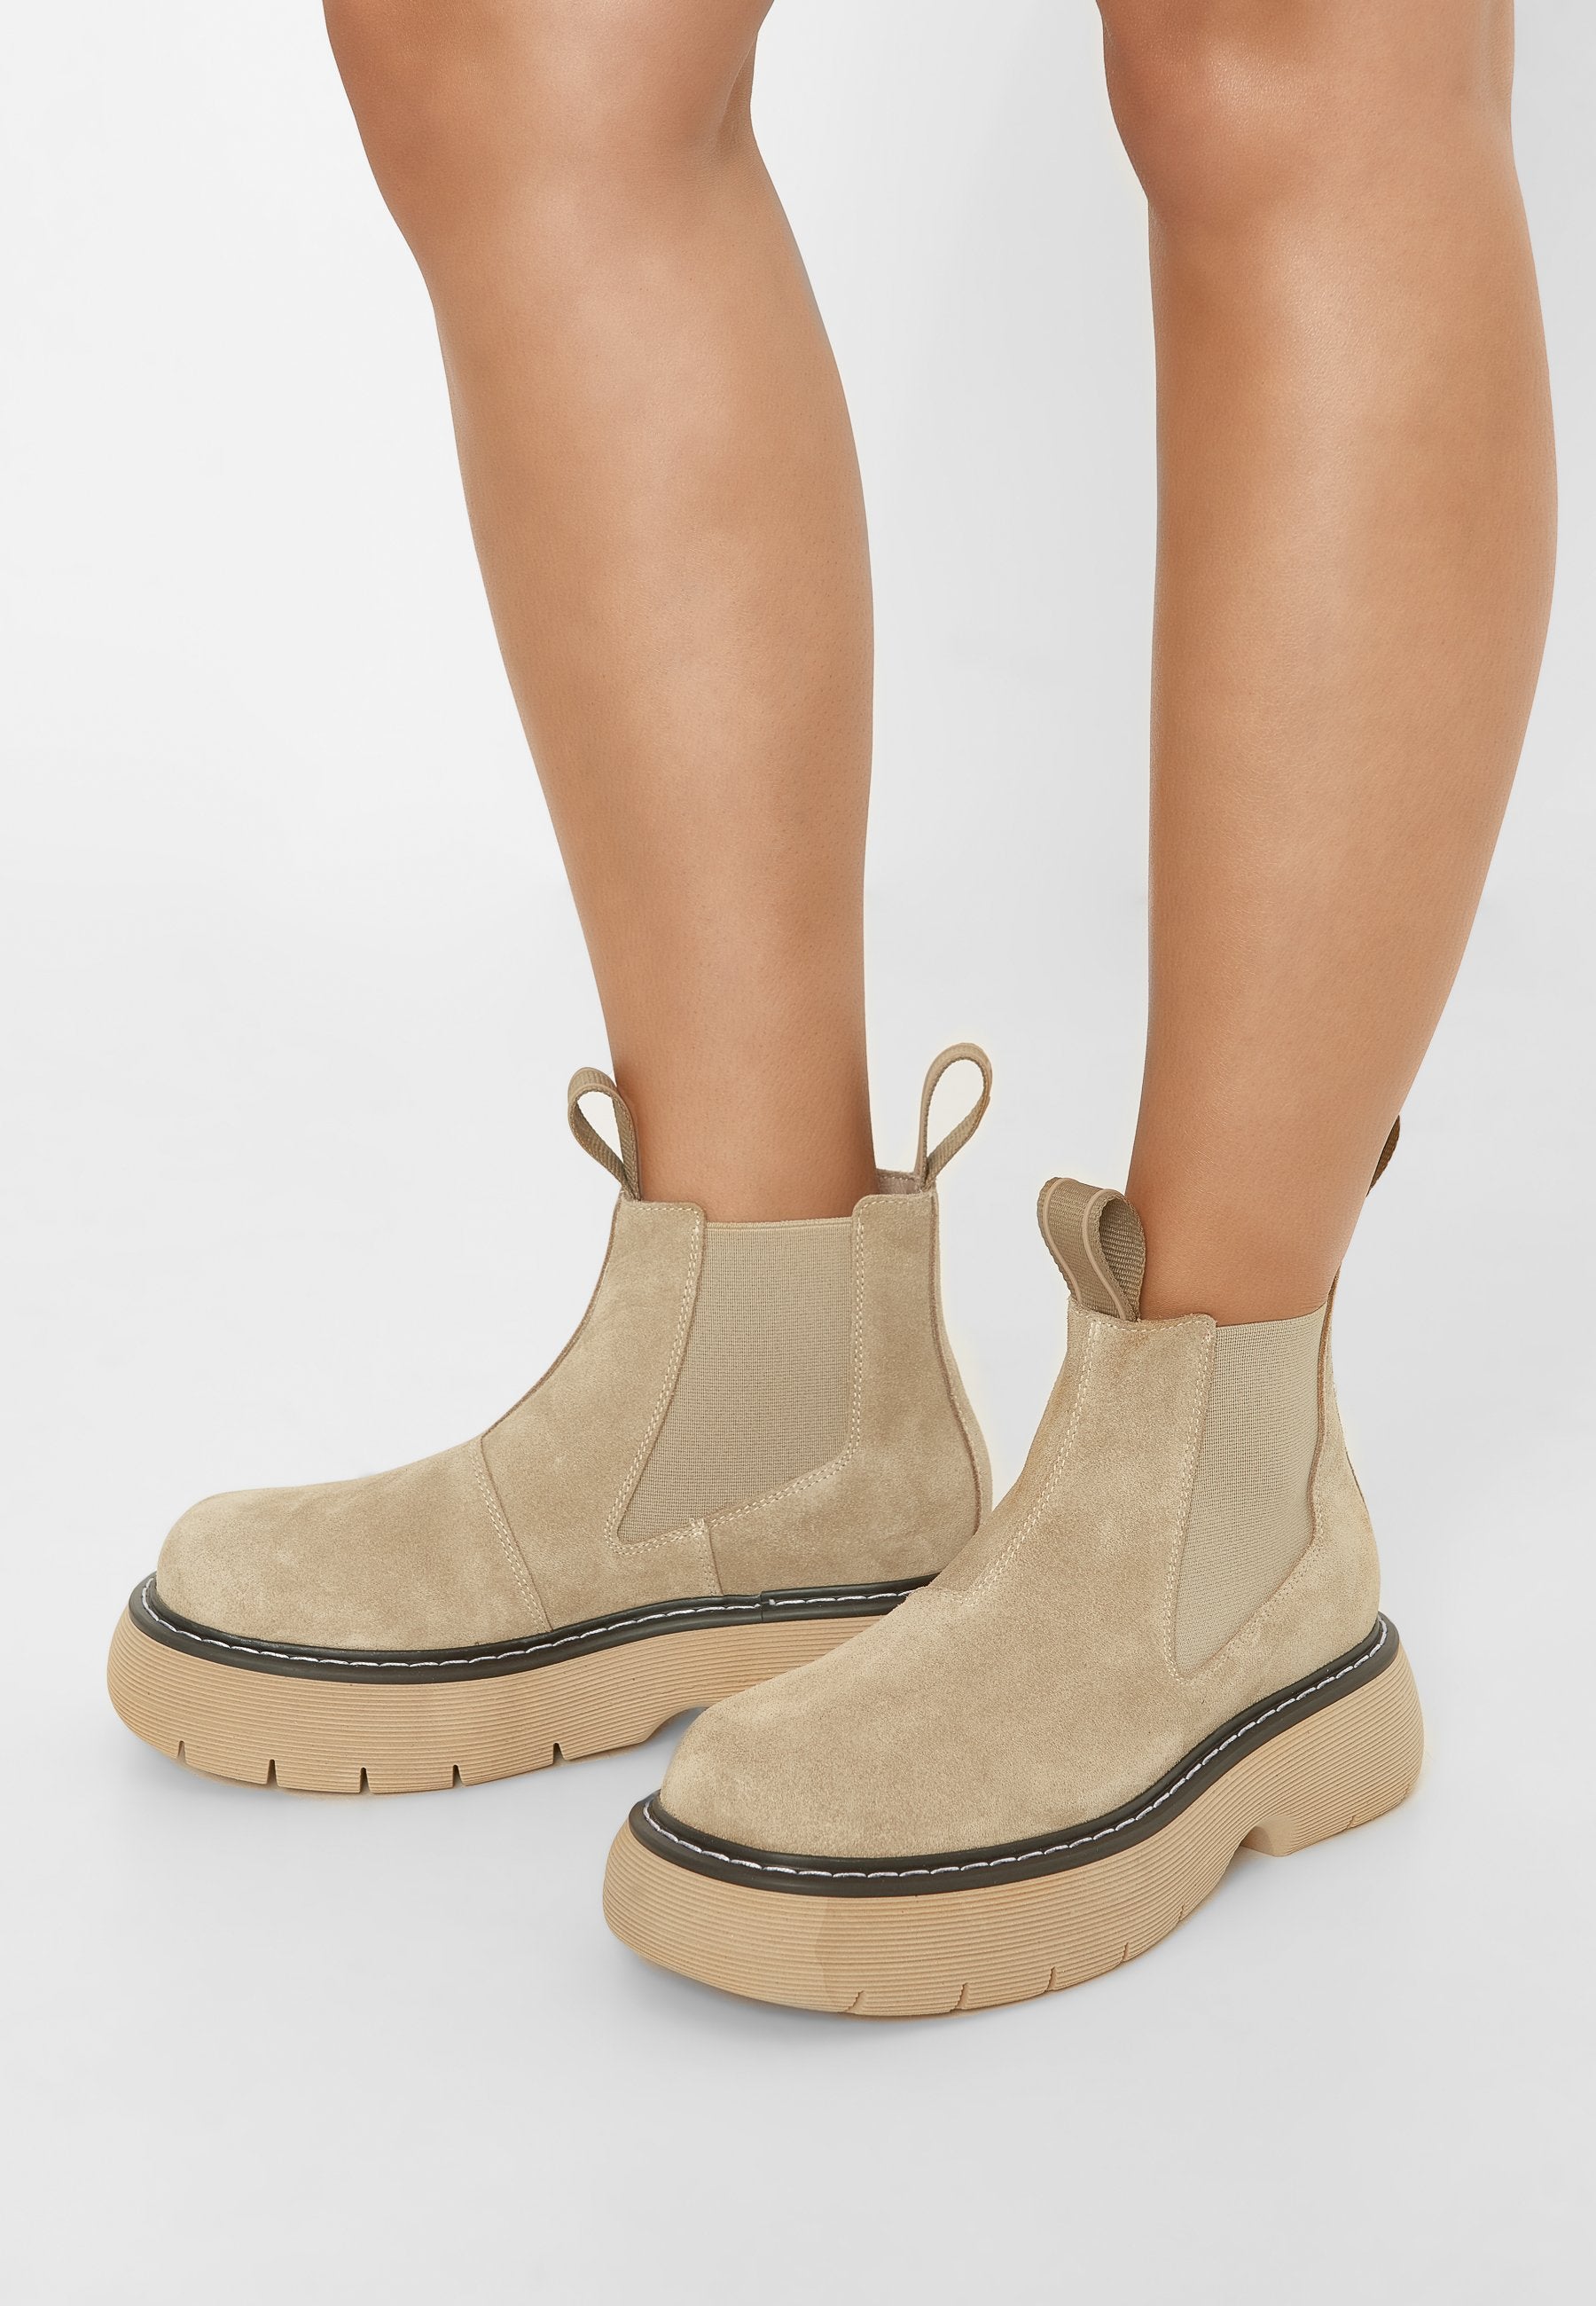 Ella Sand Suede Leather Chelsea Boots LAST1475 - 8